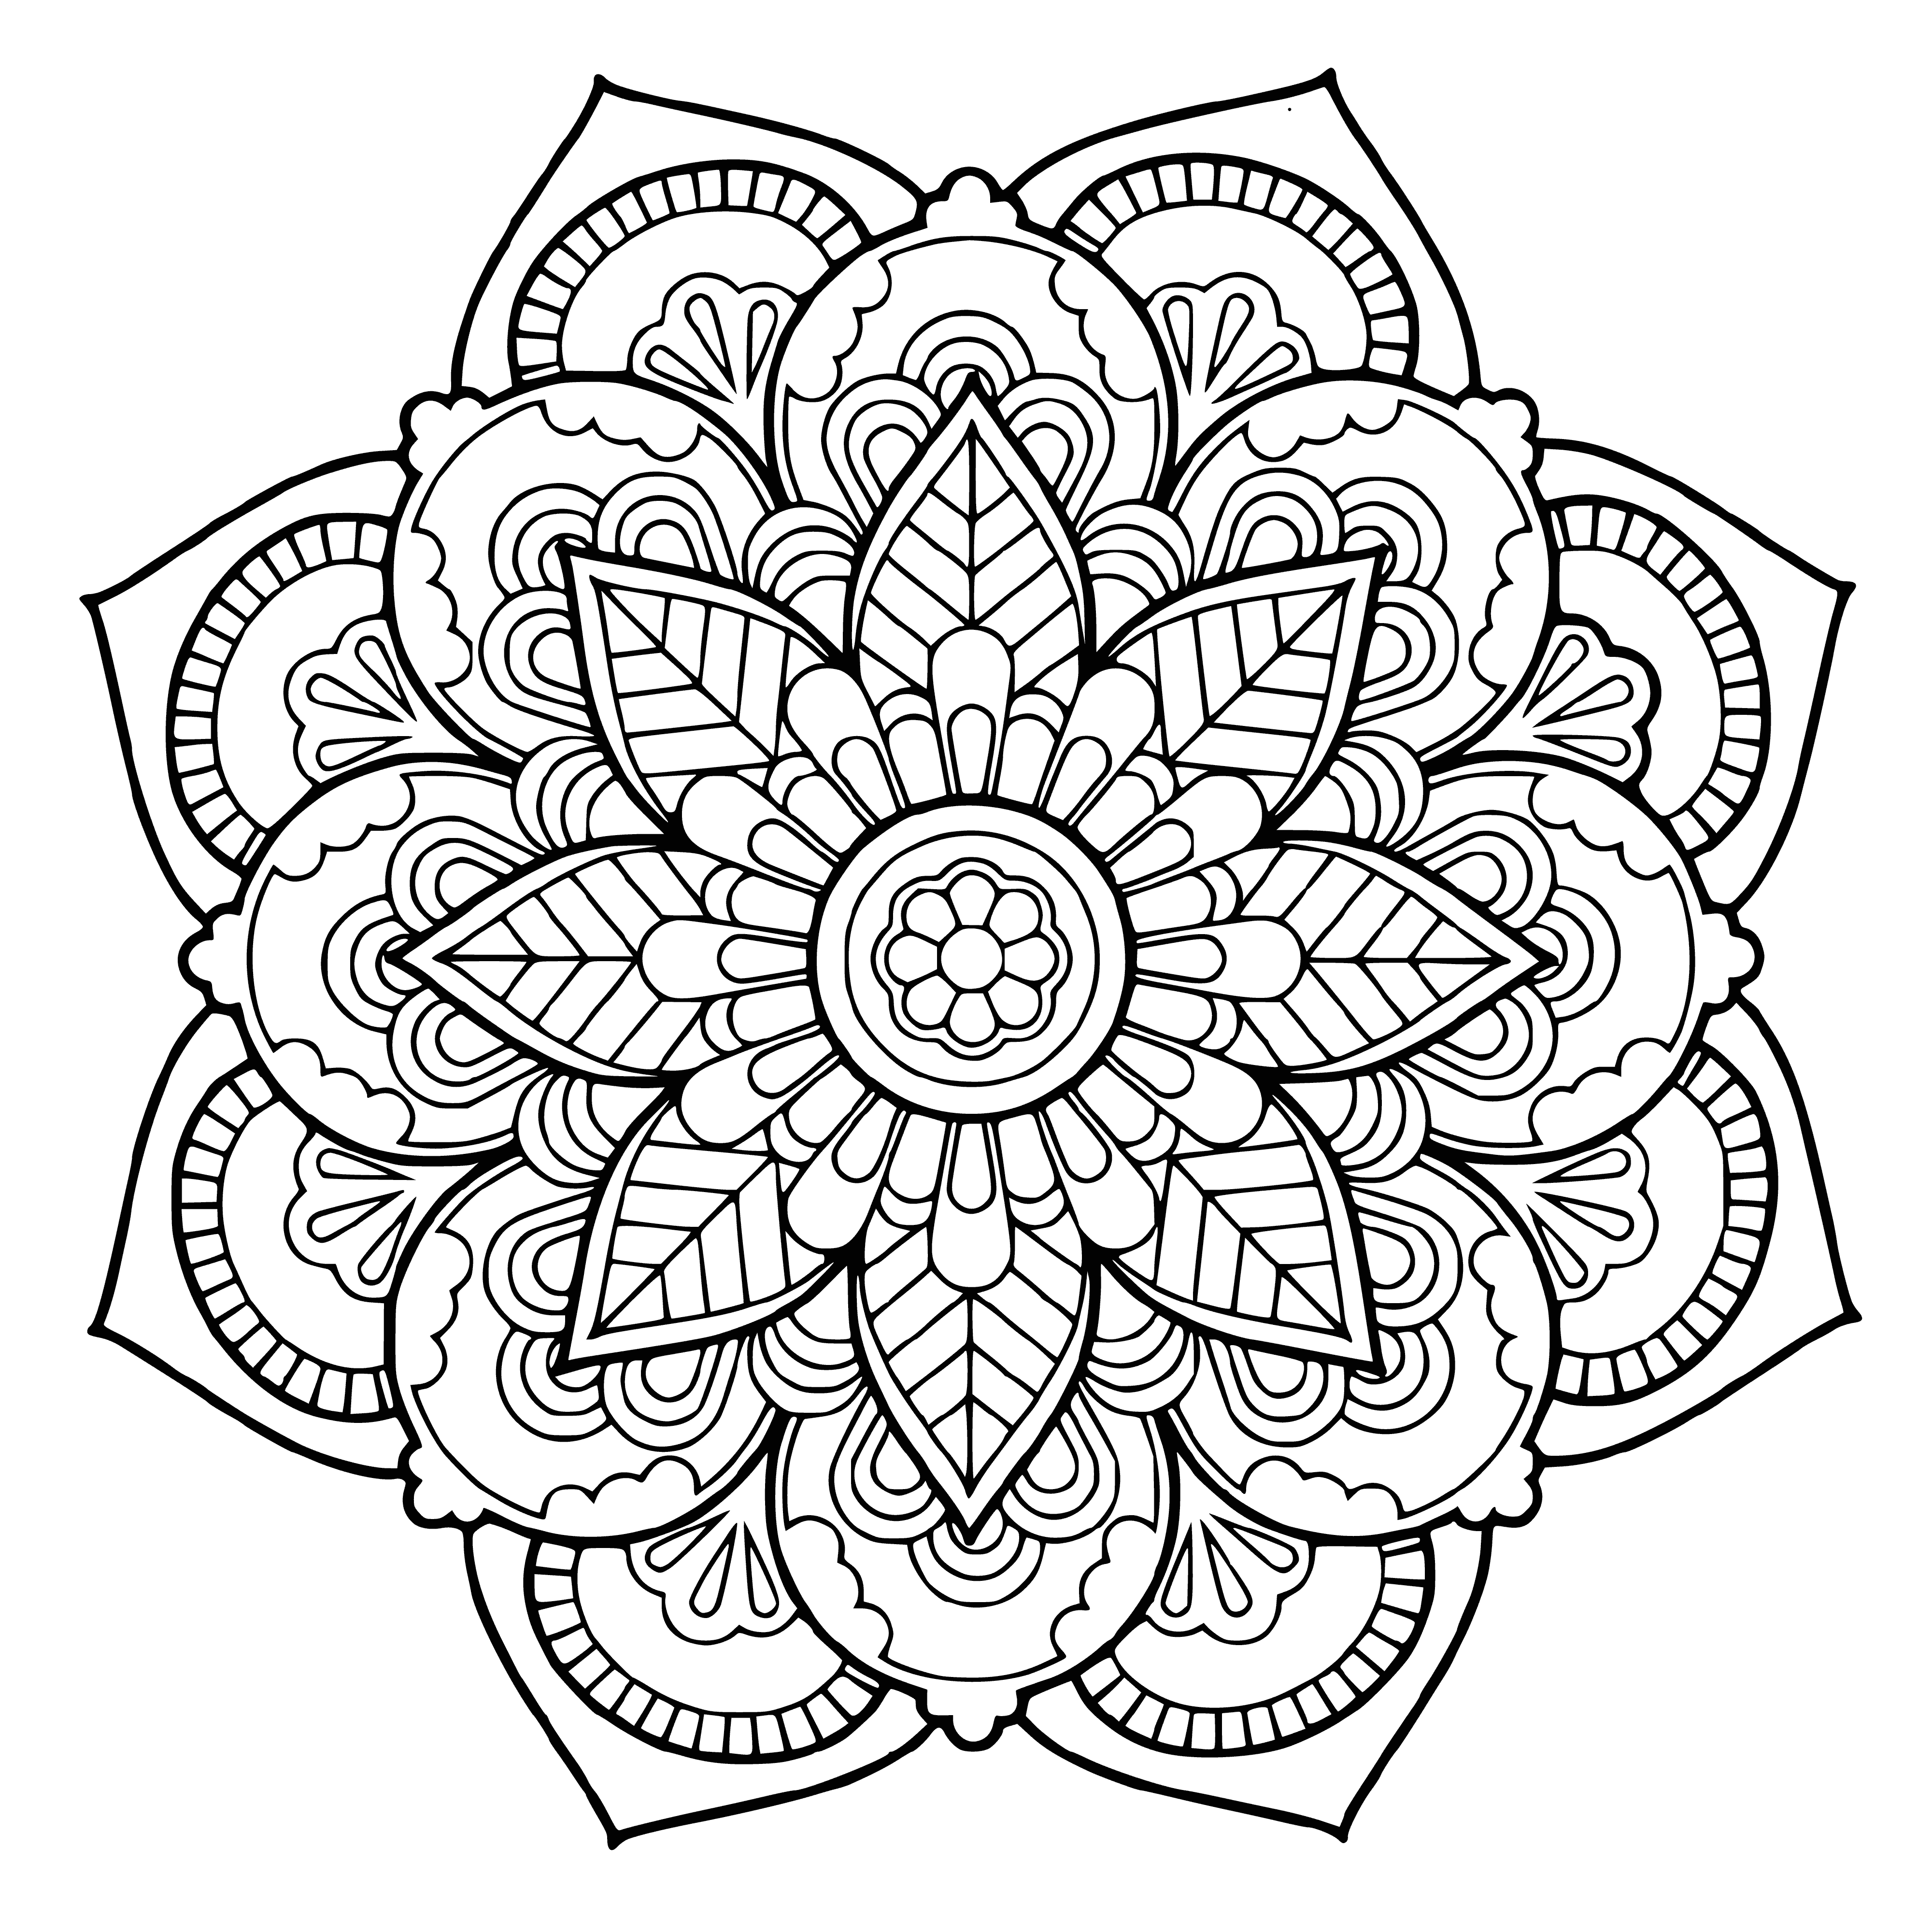 coloring page: A mandala w/ 8, 6, and 4-petal flowers. Lines connect them, geometric shapes surround all. Different colors for all.